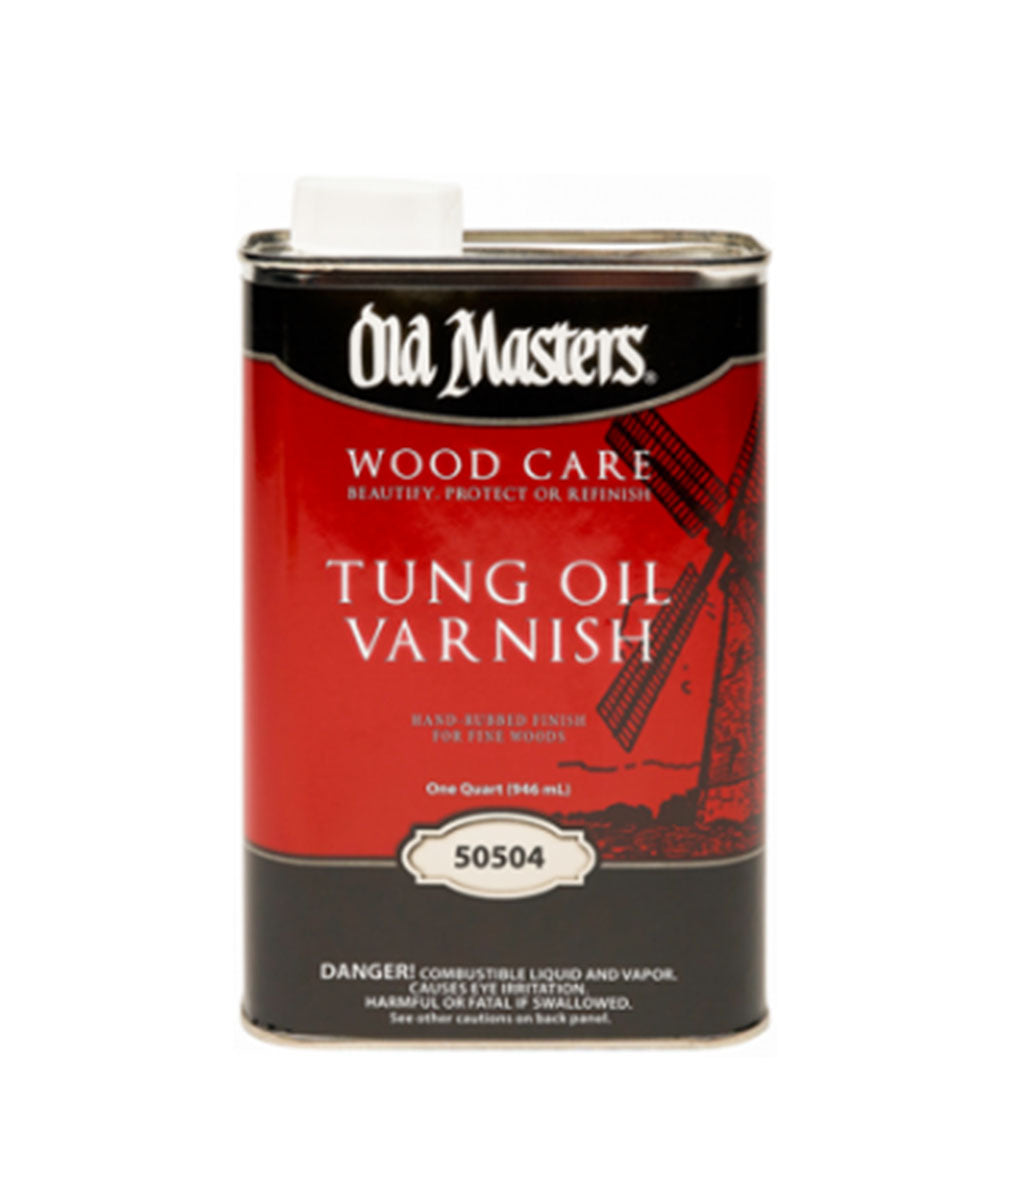 Old Masters Tung Oil Varnish, available at Clement's Paint in Austin, TX.